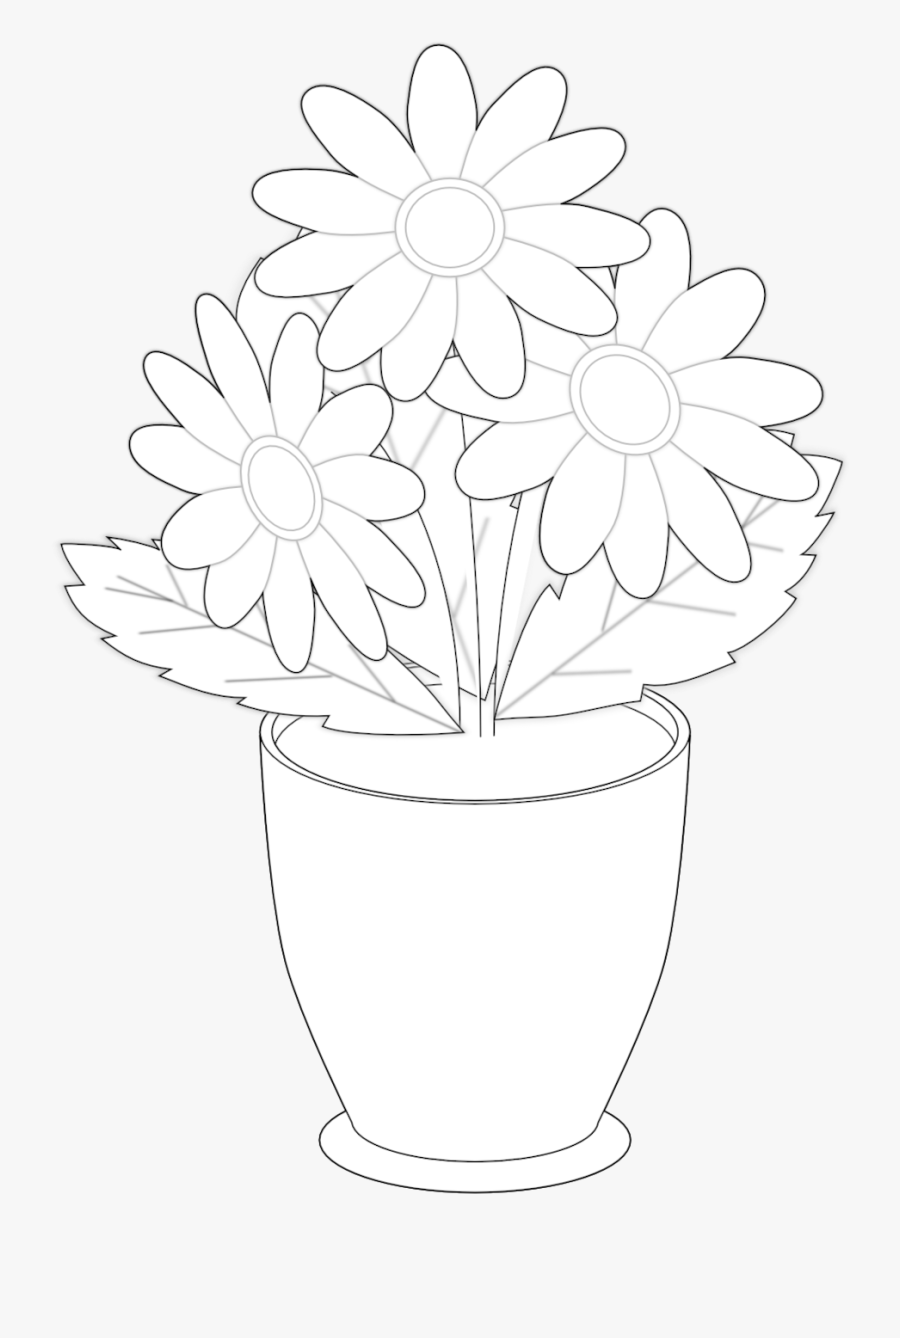 Vase Clipart Beautiful Vase - Flower Vase With Flowers Drawing, Transparent Clipart